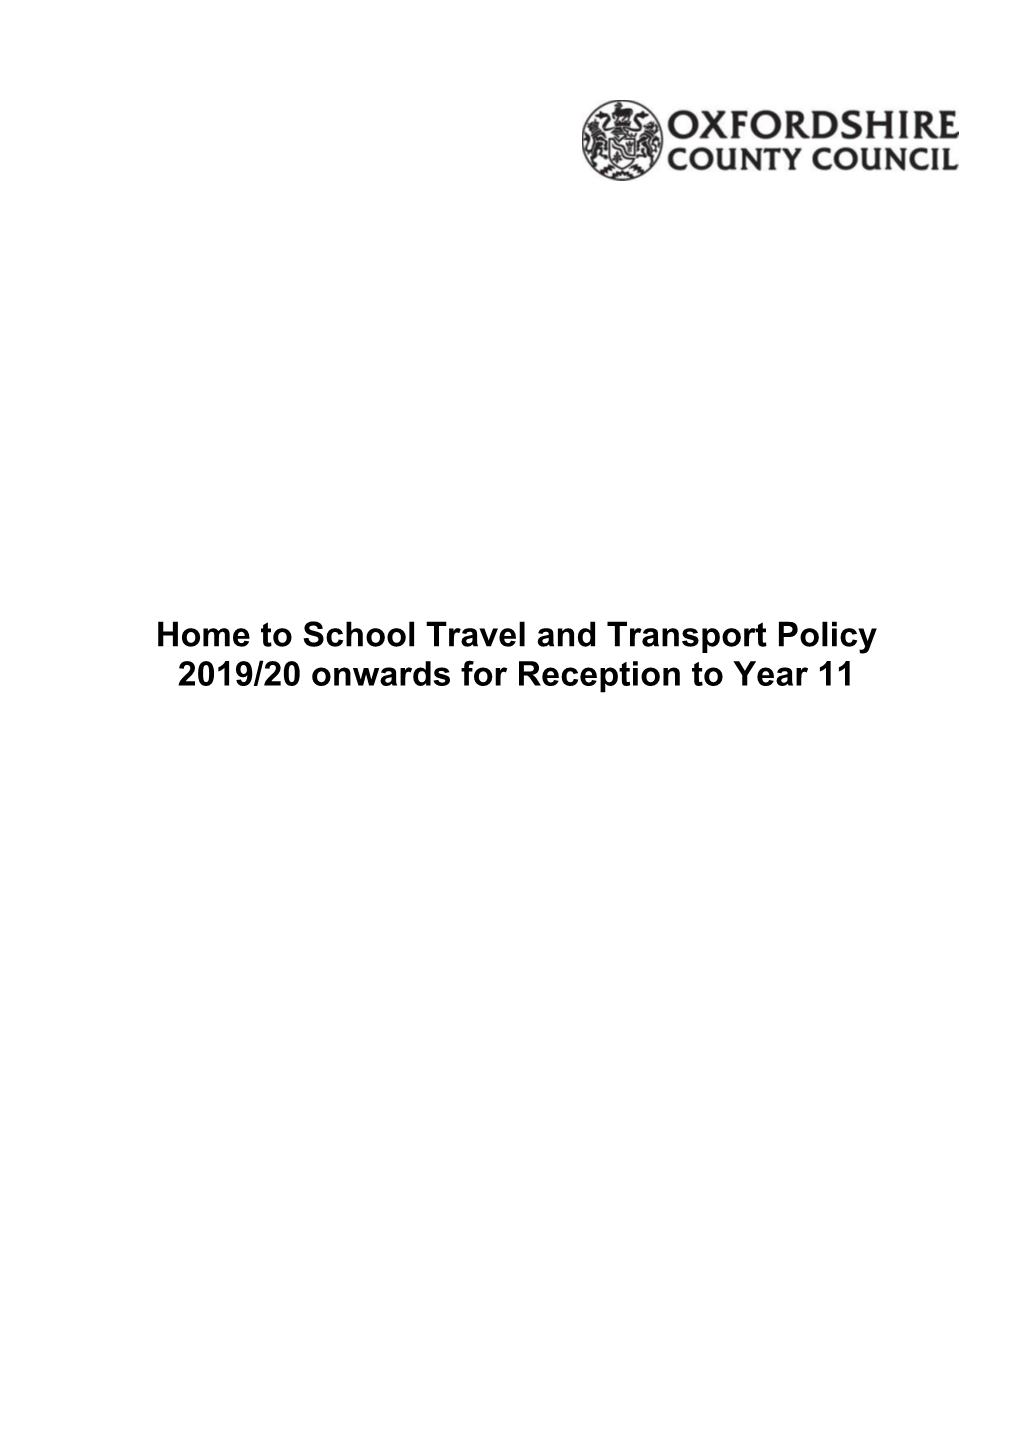 Home to School Travel and Transport Policy 2019/20 Onwards for Reception to Year 11